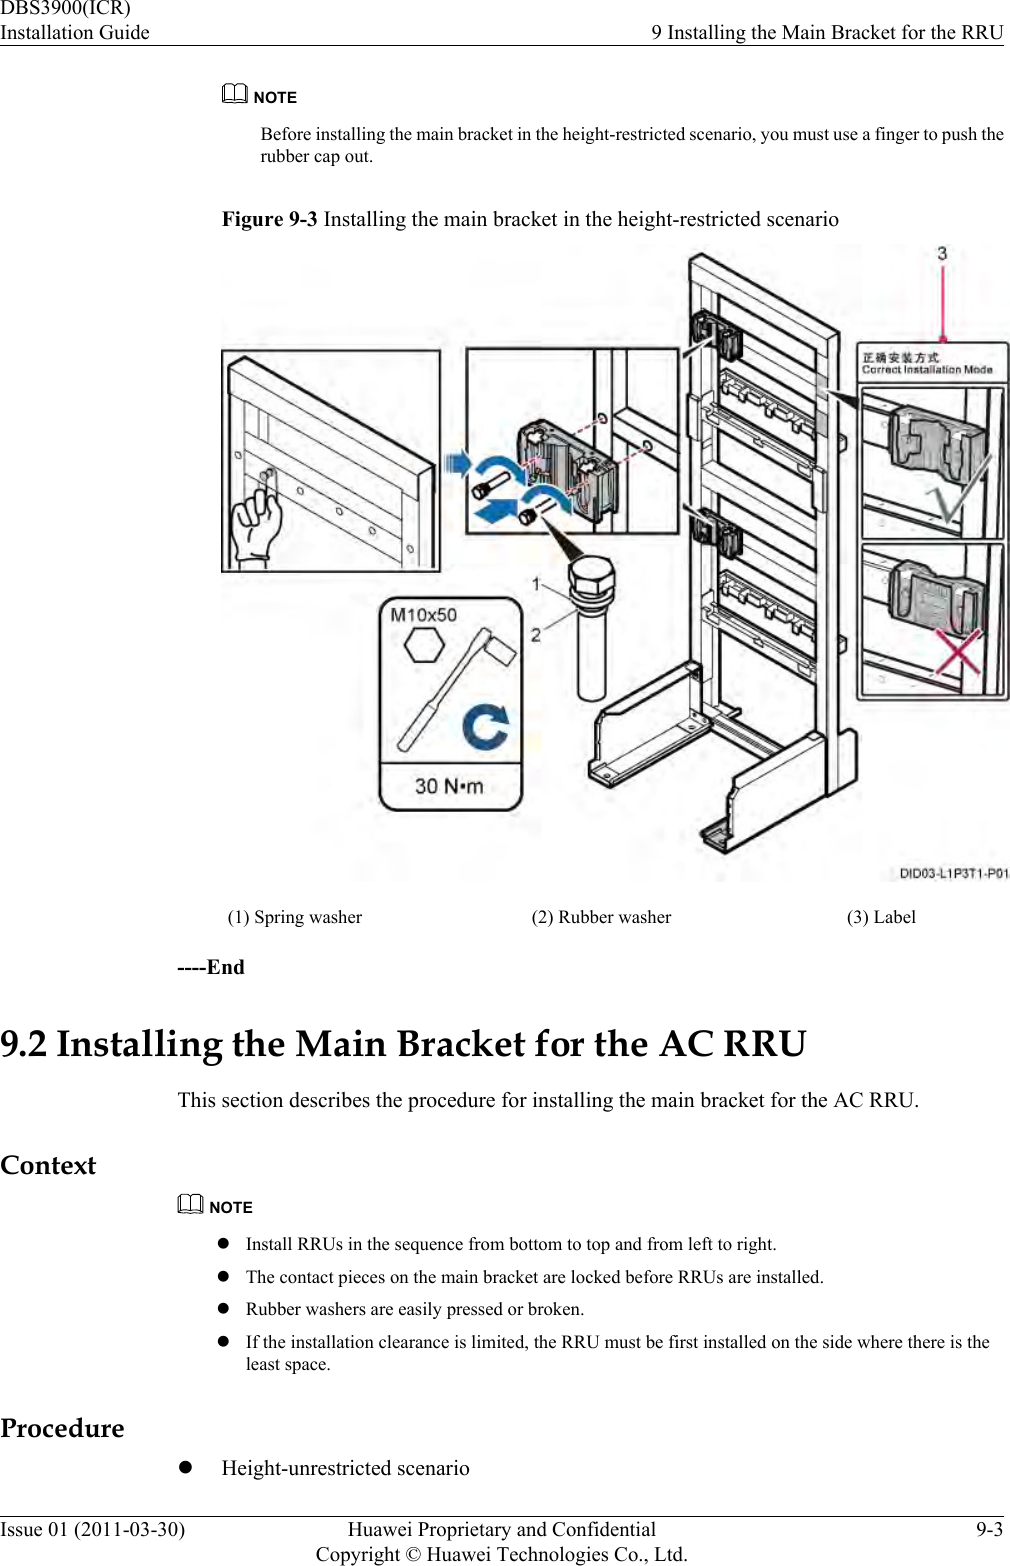 NOTEBefore installing the main bracket in the height-restricted scenario, you must use a finger to push therubber cap out.Figure 9-3 Installing the main bracket in the height-restricted scenario(1) Spring washer (2) Rubber washer (3) Label----End9.2 Installing the Main Bracket for the AC RRUThis section describes the procedure for installing the main bracket for the AC RRU.ContextNOTElInstall RRUs in the sequence from bottom to top and from left to right.lThe contact pieces on the main bracket are locked before RRUs are installed.lRubber washers are easily pressed or broken.lIf the installation clearance is limited, the RRU must be first installed on the side where there is theleast space.ProcedurelHeight-unrestricted scenarioDBS3900(ICR)Installation Guide 9 Installing the Main Bracket for the RRUIssue 01 (2011-03-30) Huawei Proprietary and ConfidentialCopyright © Huawei Technologies Co., Ltd.9-3